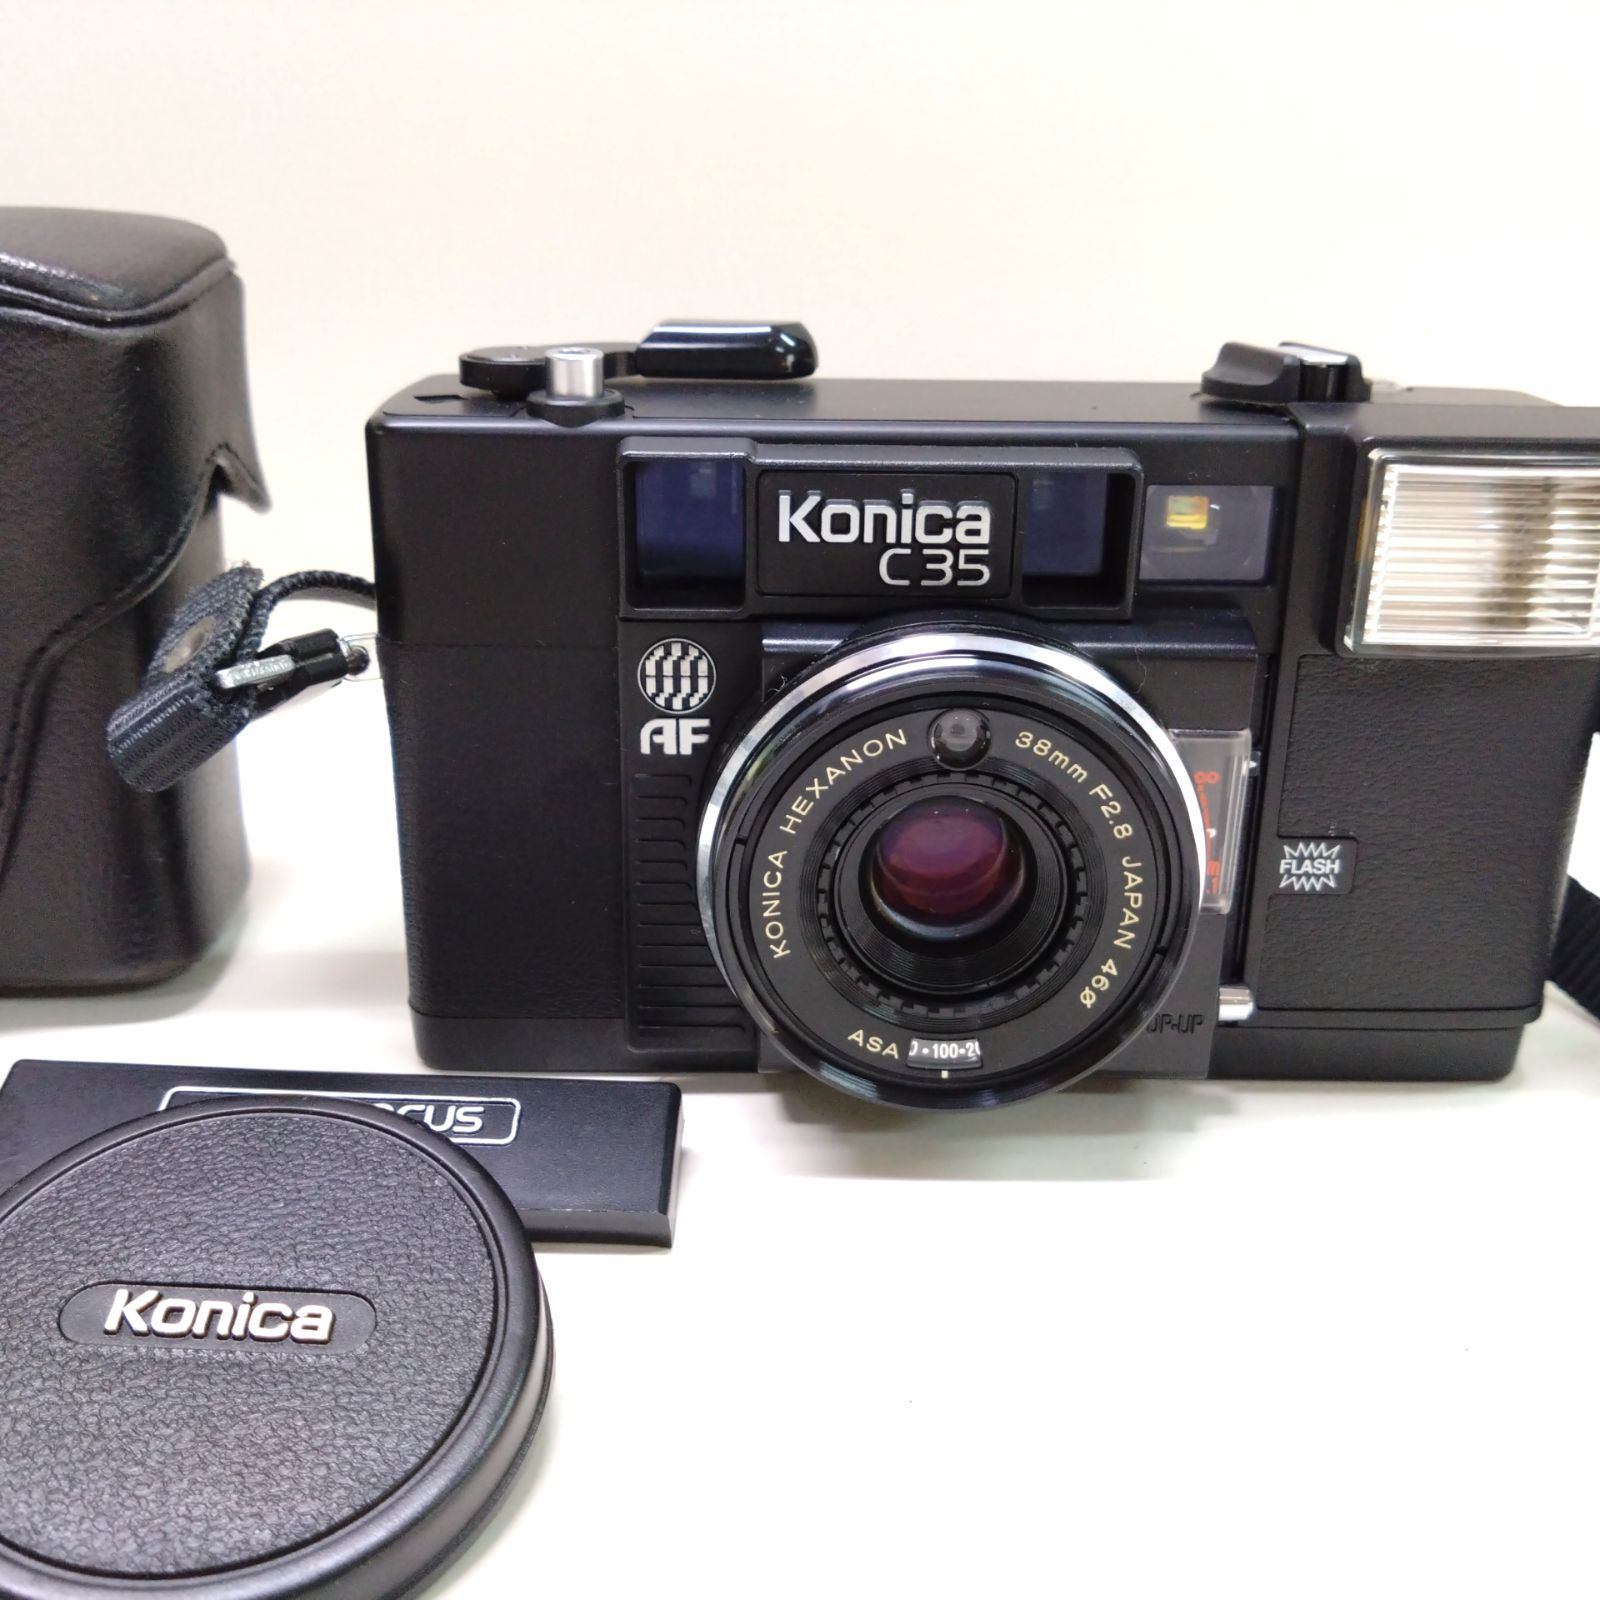 Konica c35 AF フィルムカメラ - その他